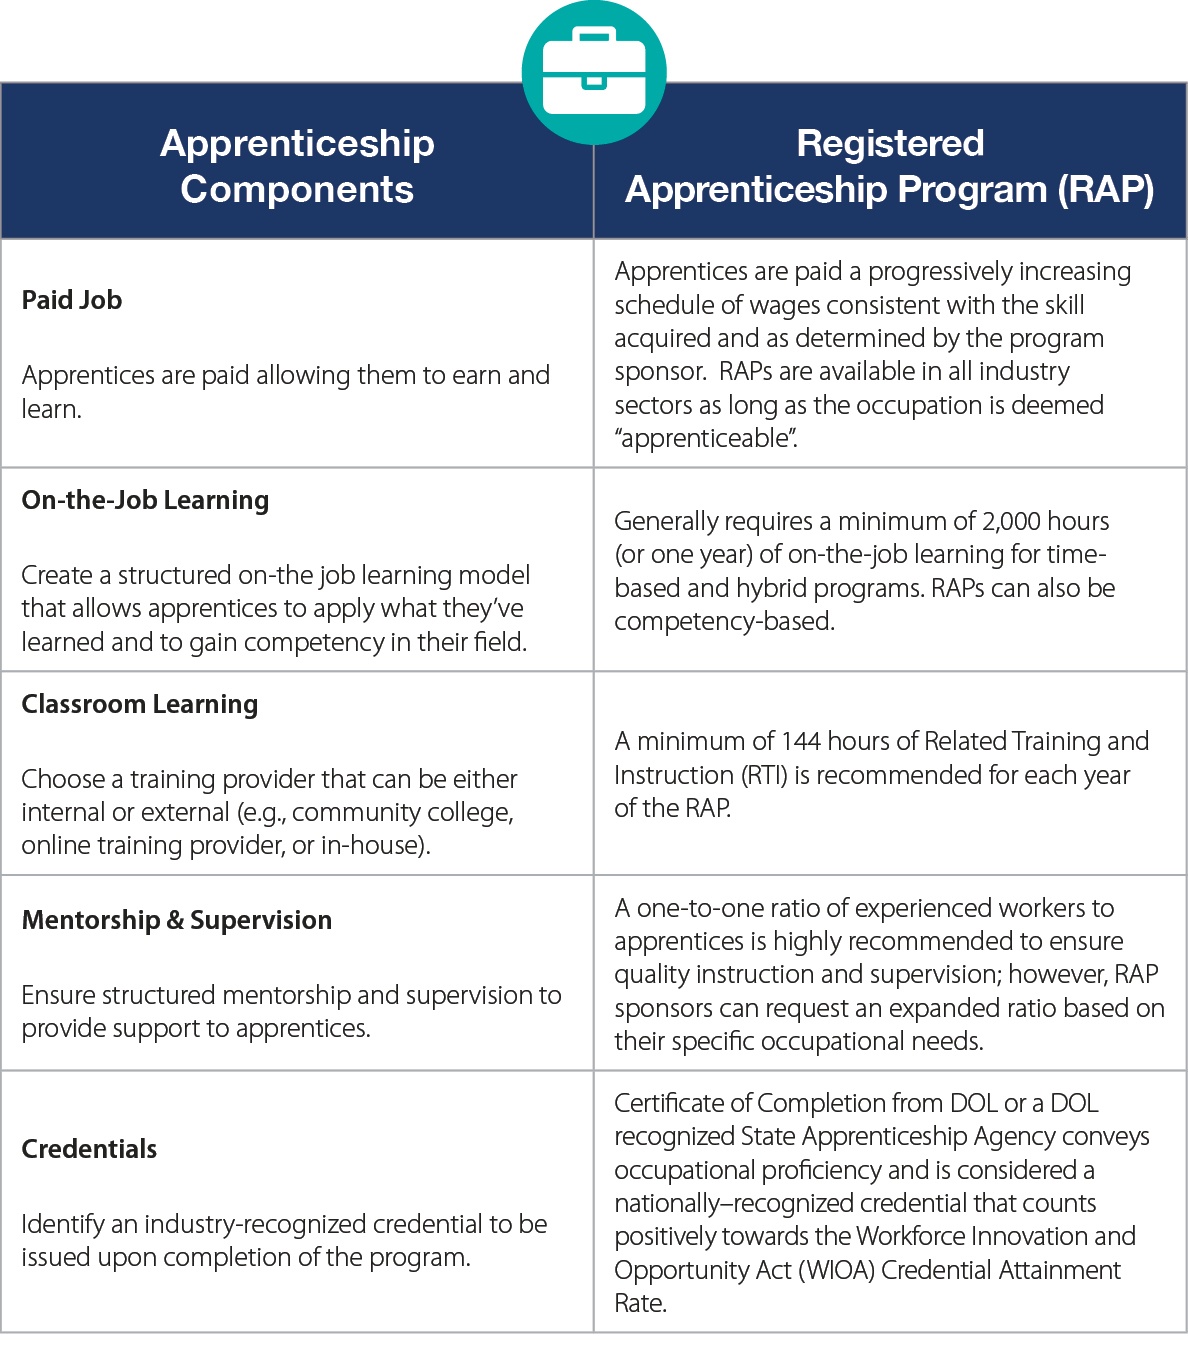 Chart showing apprenticeship components